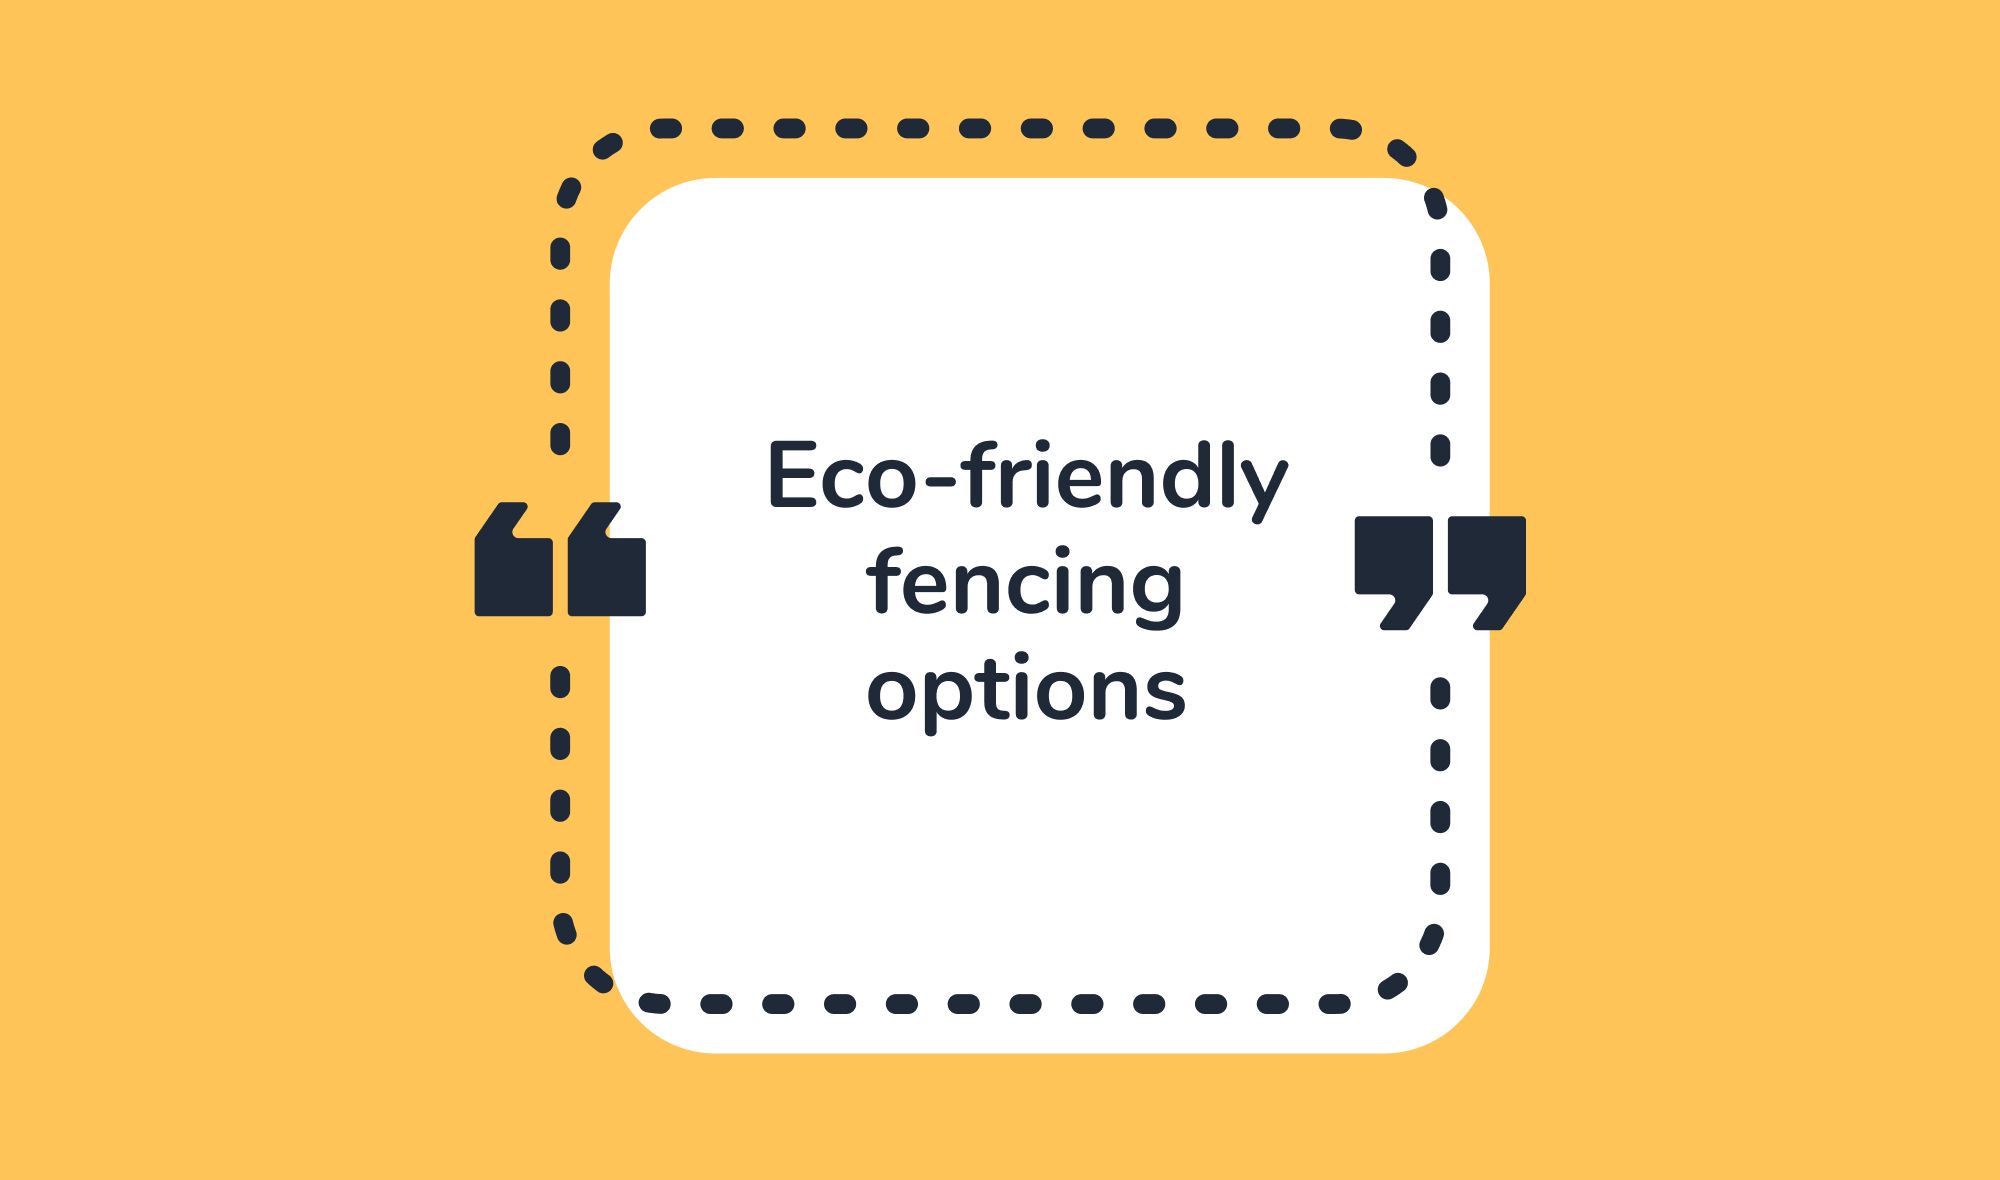 Eco-friendly fencing: a look at sustainable types of fencing